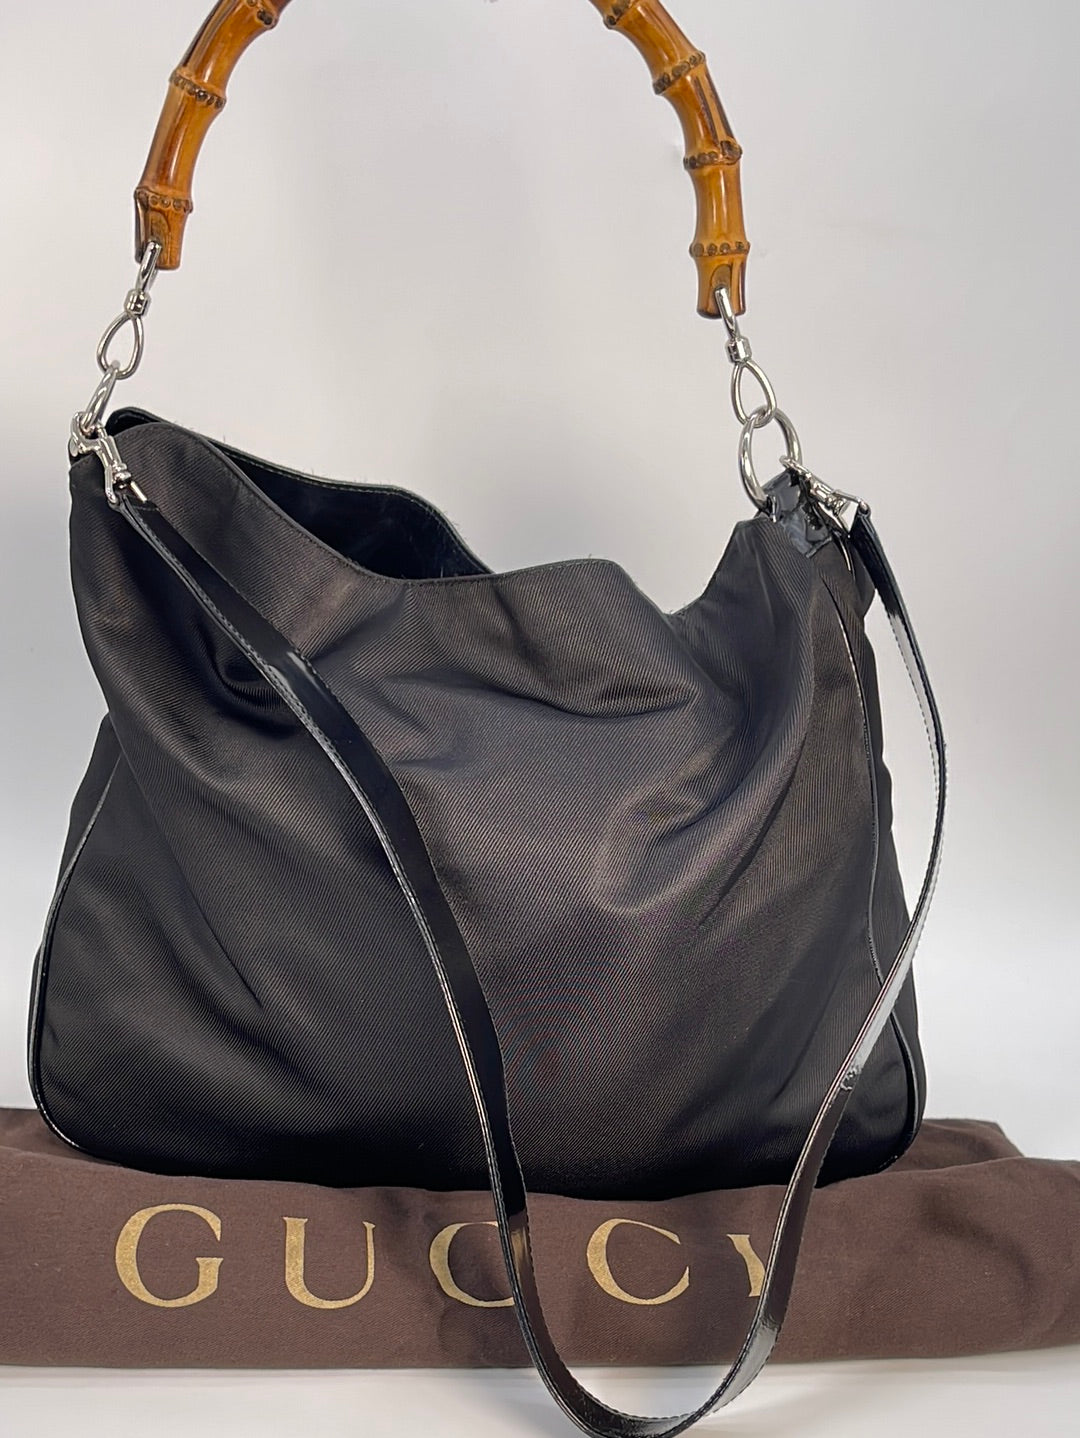 H&N Online Shop - GUCCI bags Price: 16 BD 1:1 Copy to